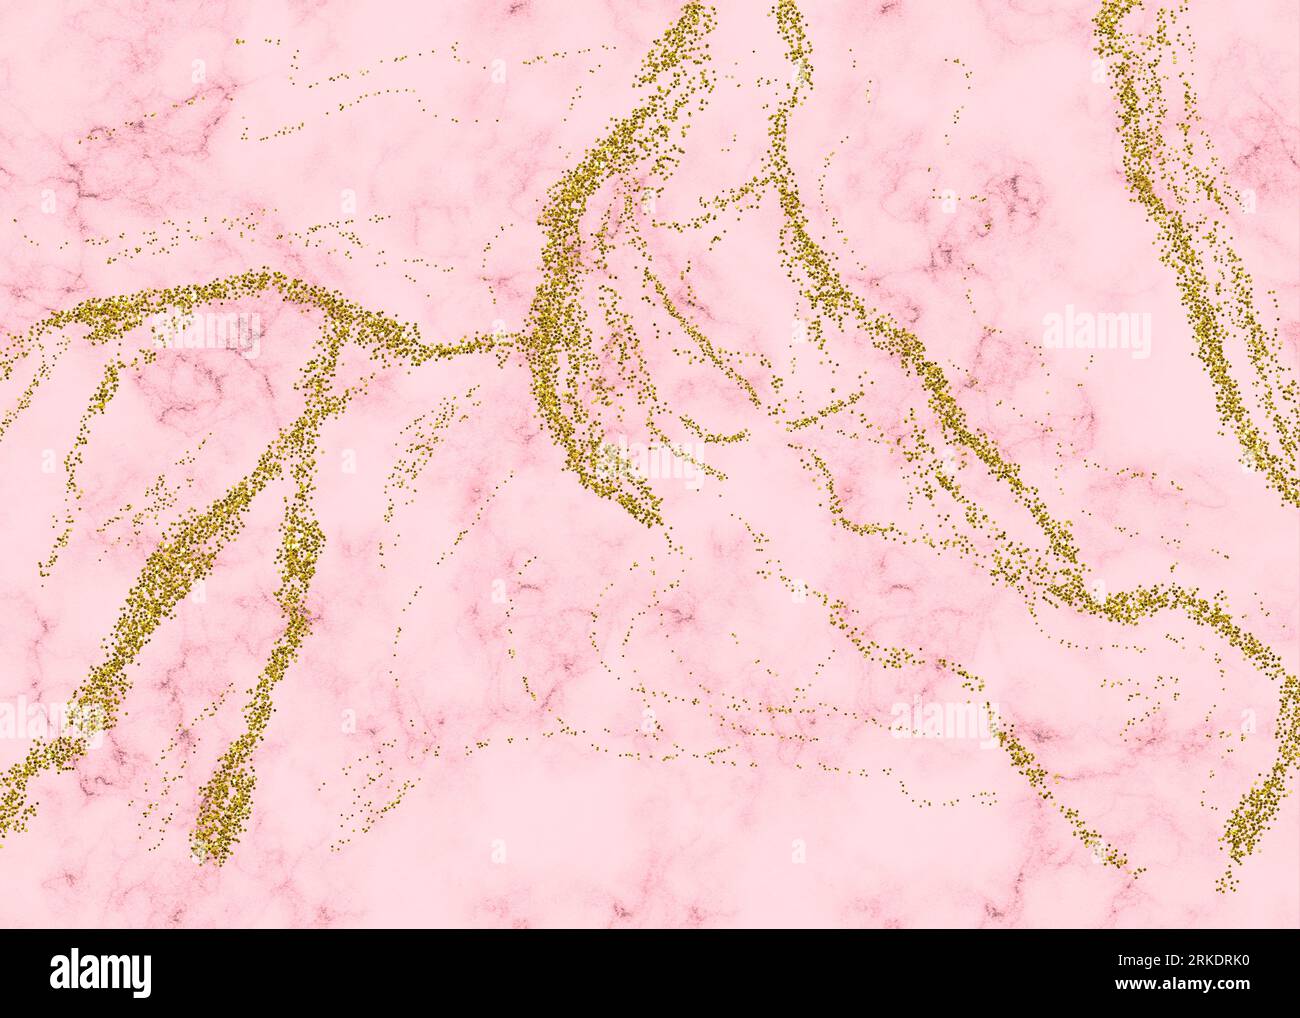 Abstract pink marble texture with golden glitters, digitally created background. Stock Photo